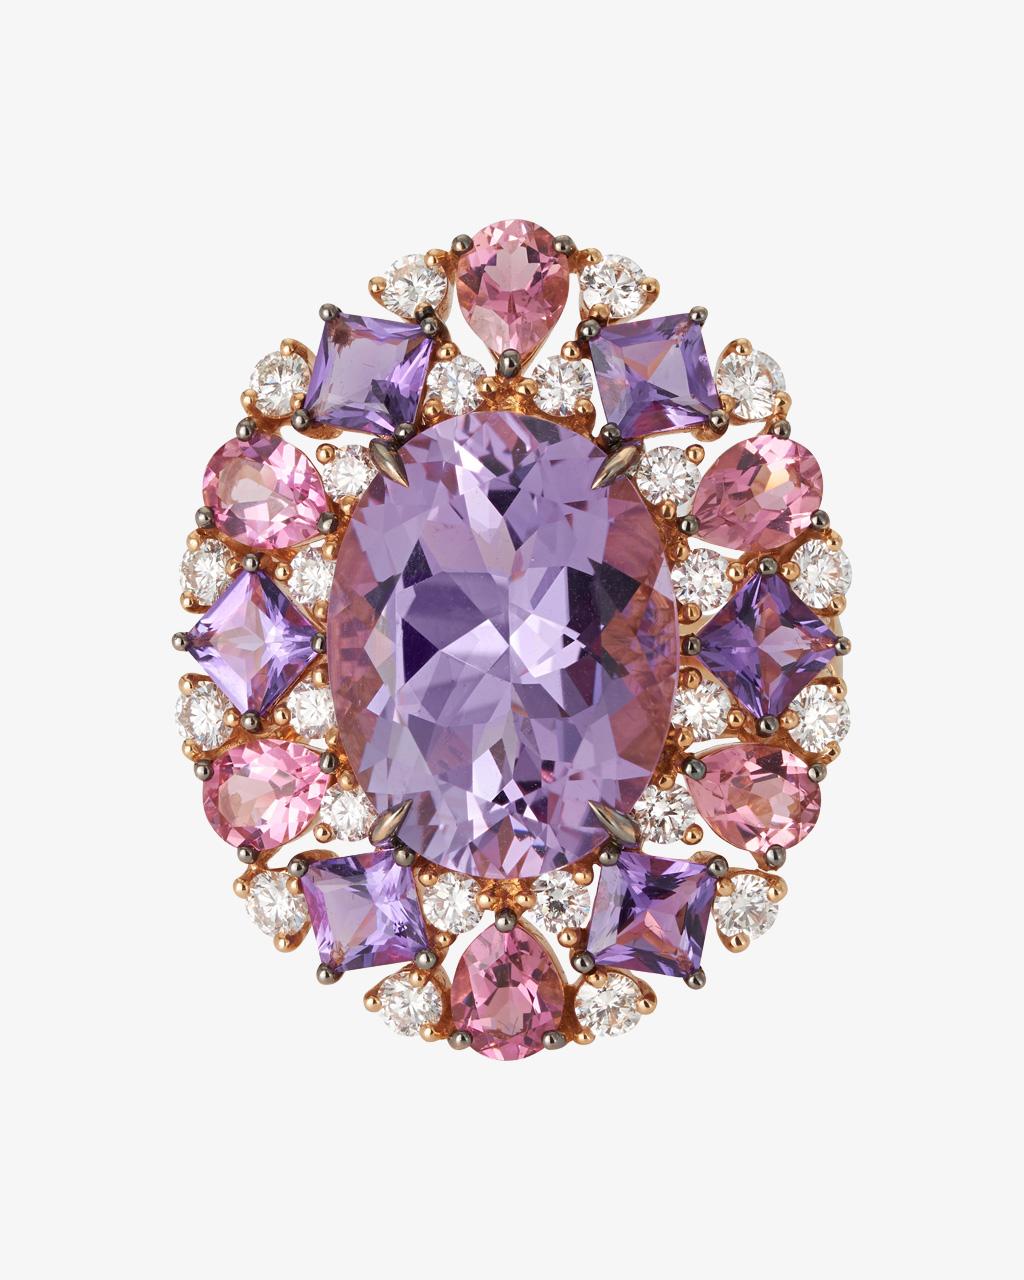 Amethyst and Pink Tourmaline Ring